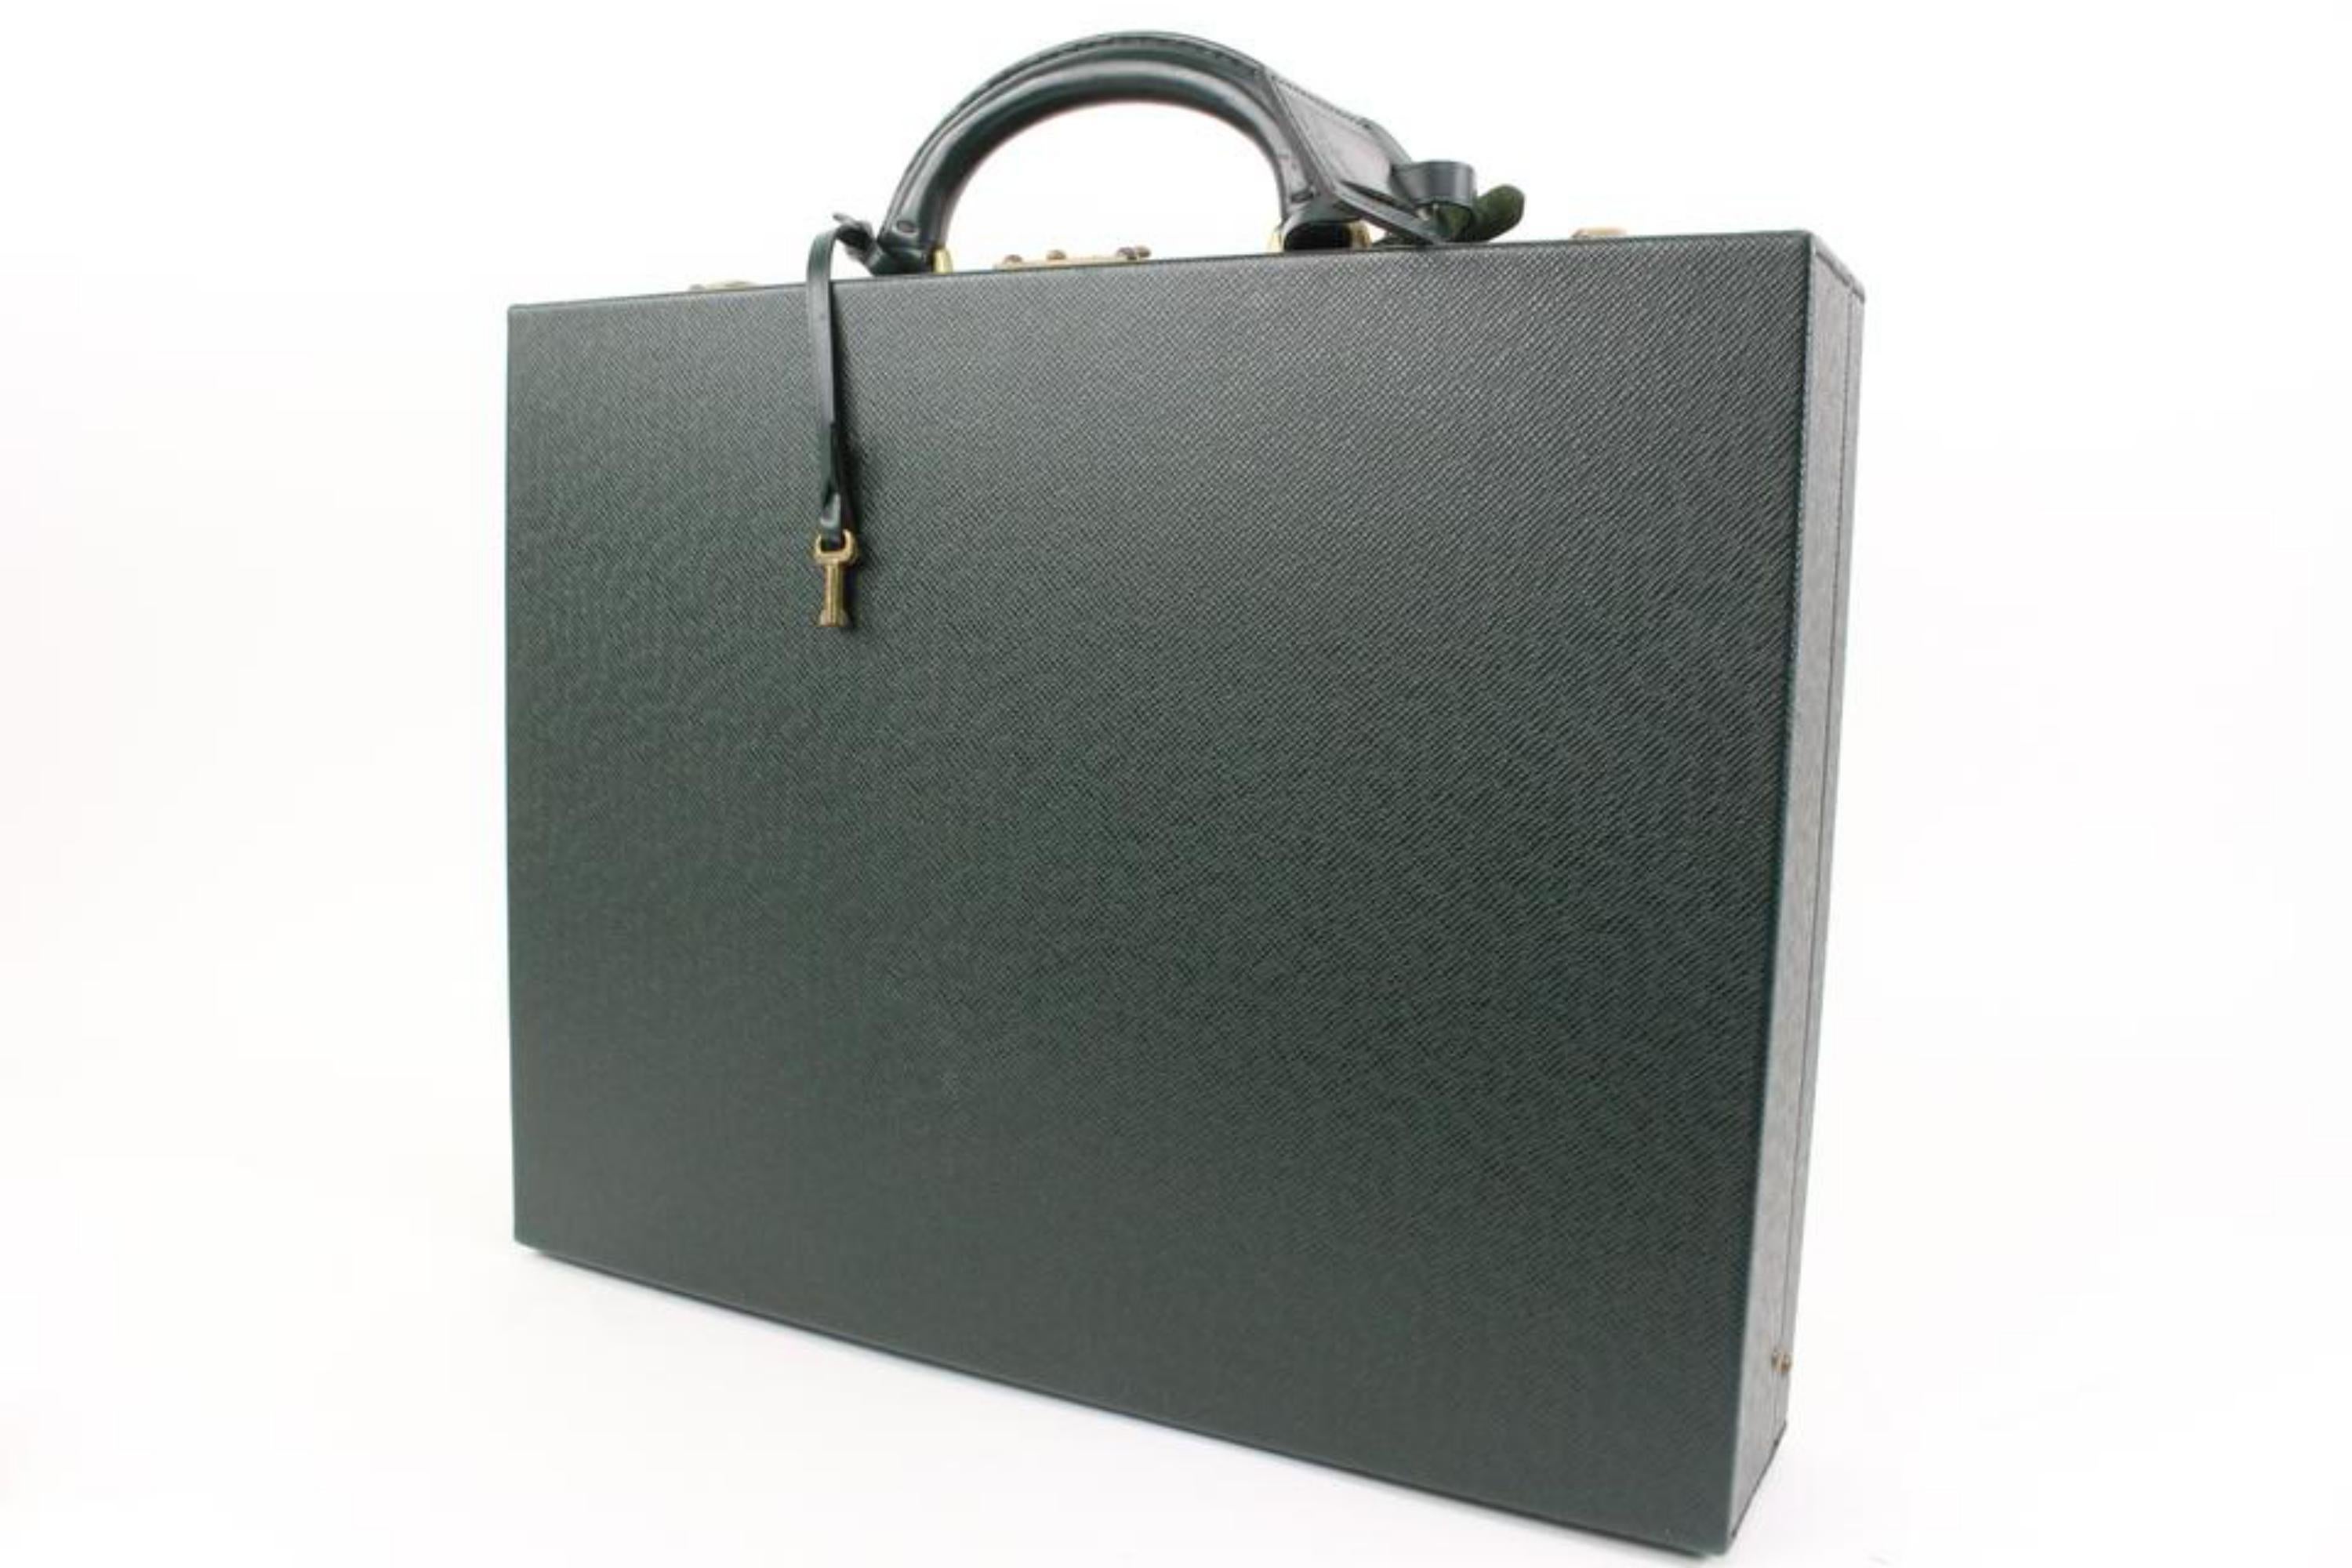 Louis Vuitton Green Taiga Diplomat Briefcase Hard Trunk 89lk323s
Date Code/Serial Number: AS0977
Made In: France
Measurements: Length:  16.2